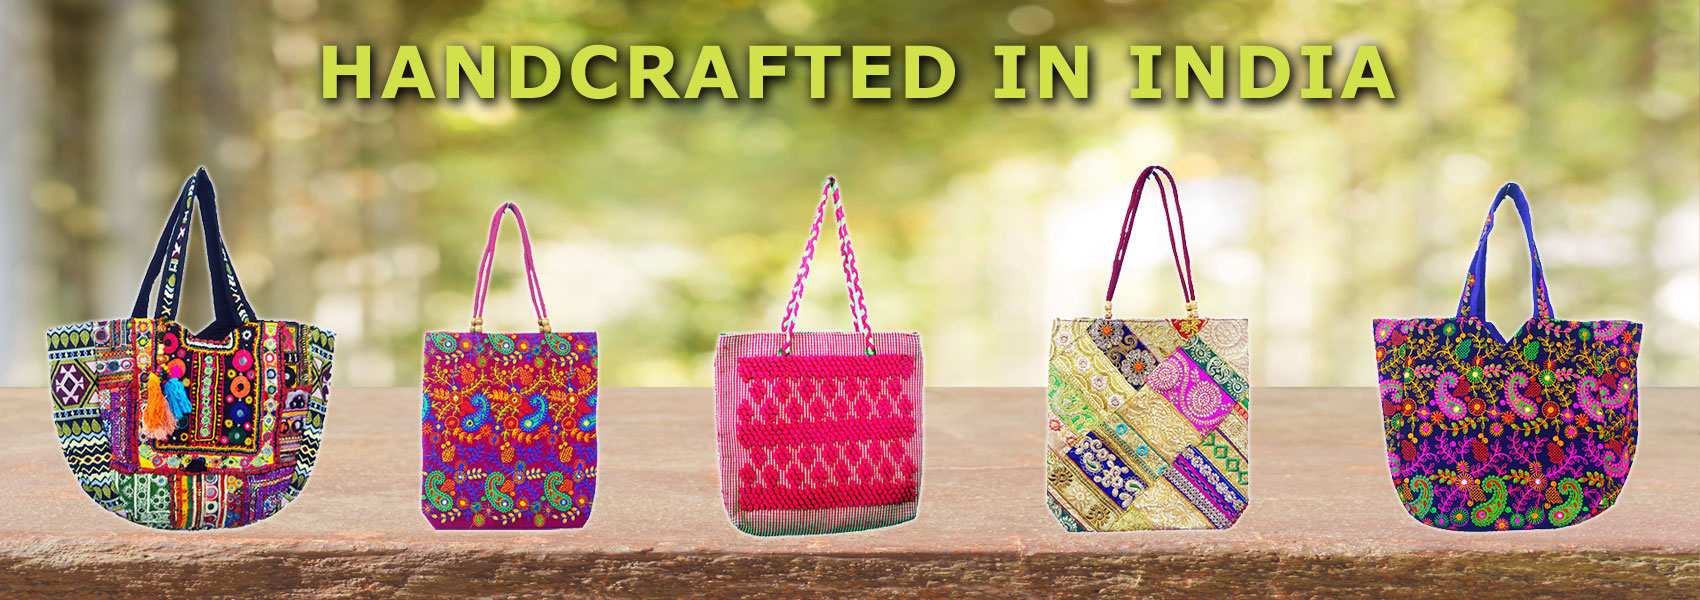 Bags Handcrafted in India